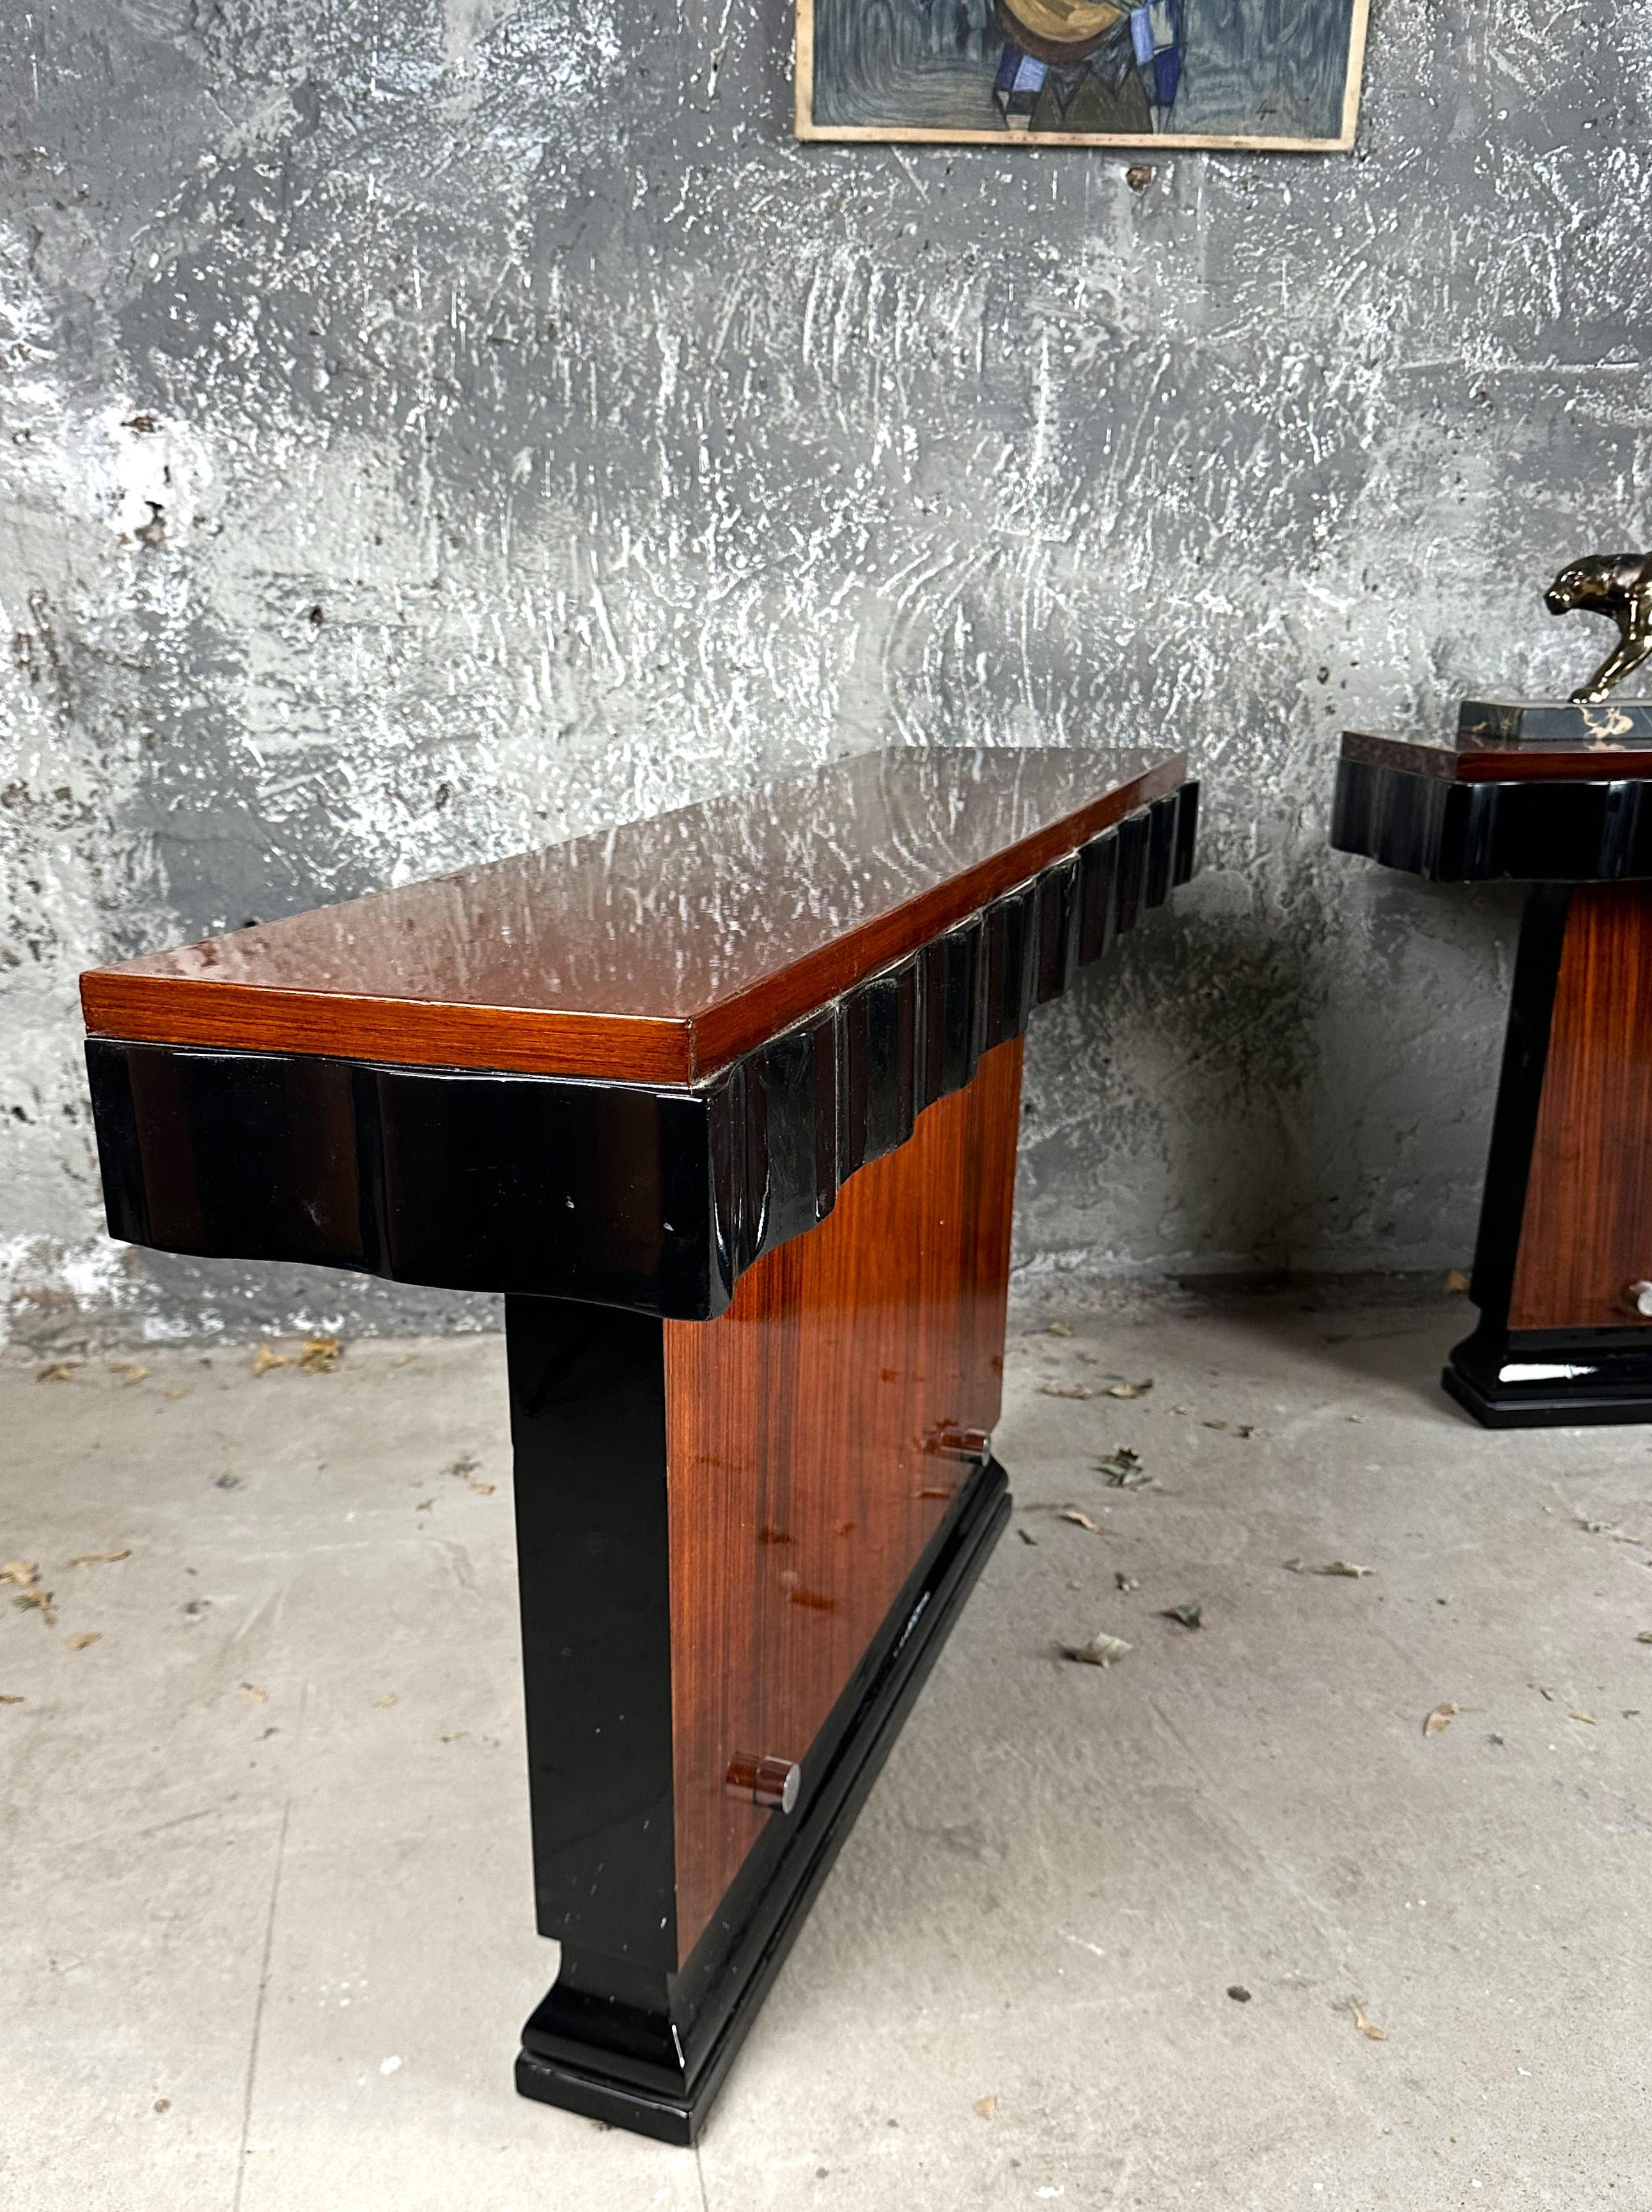 Art Deco Modernist Pair of Console Tables by Kristian Krass, France 1935 For Sale 2